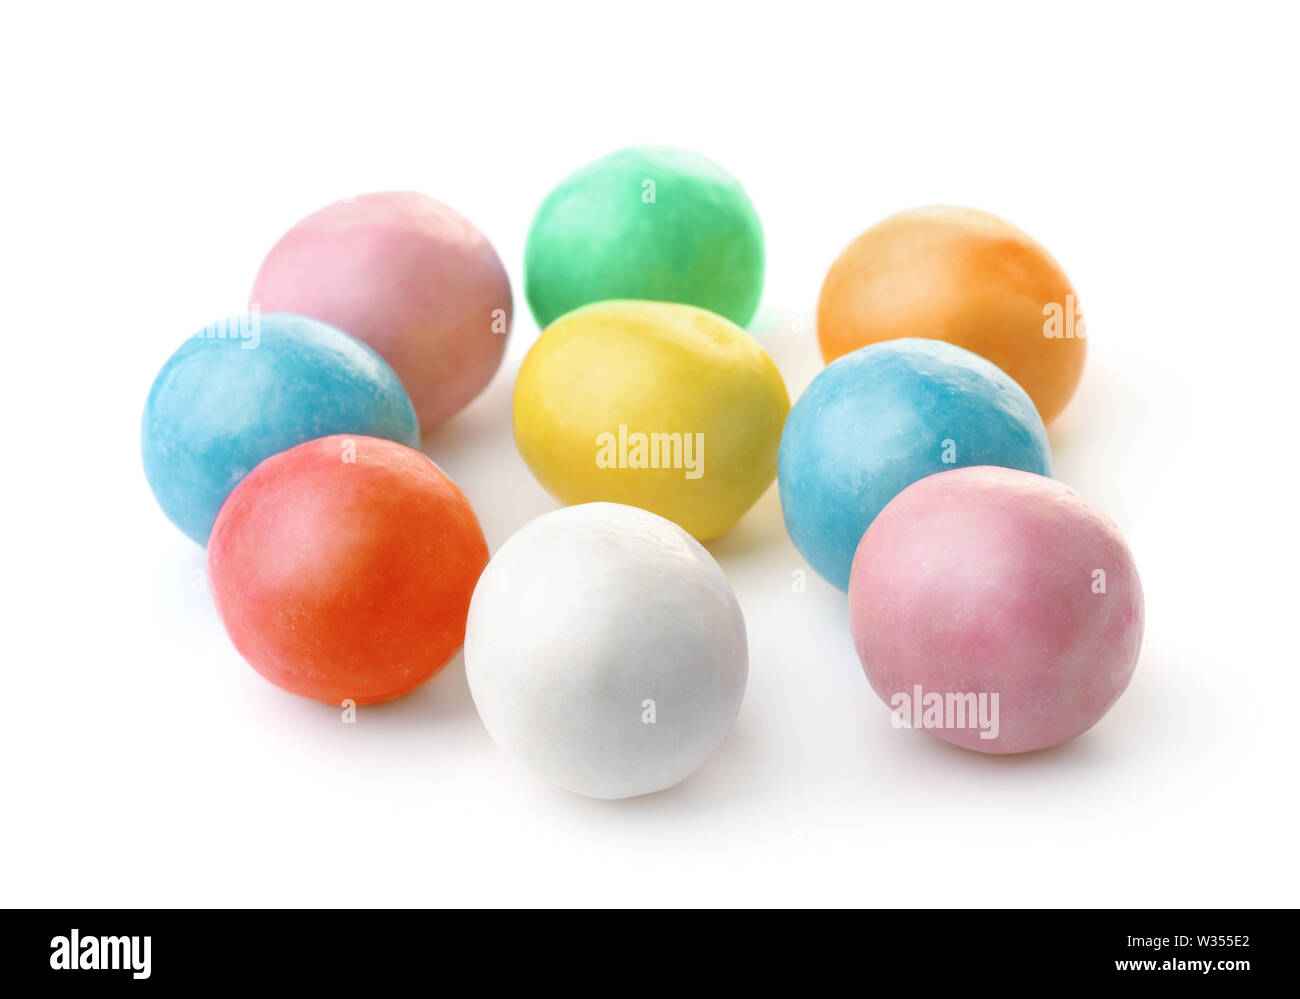 Group of colorful chewing  gum balls isolated on white Stock Photo